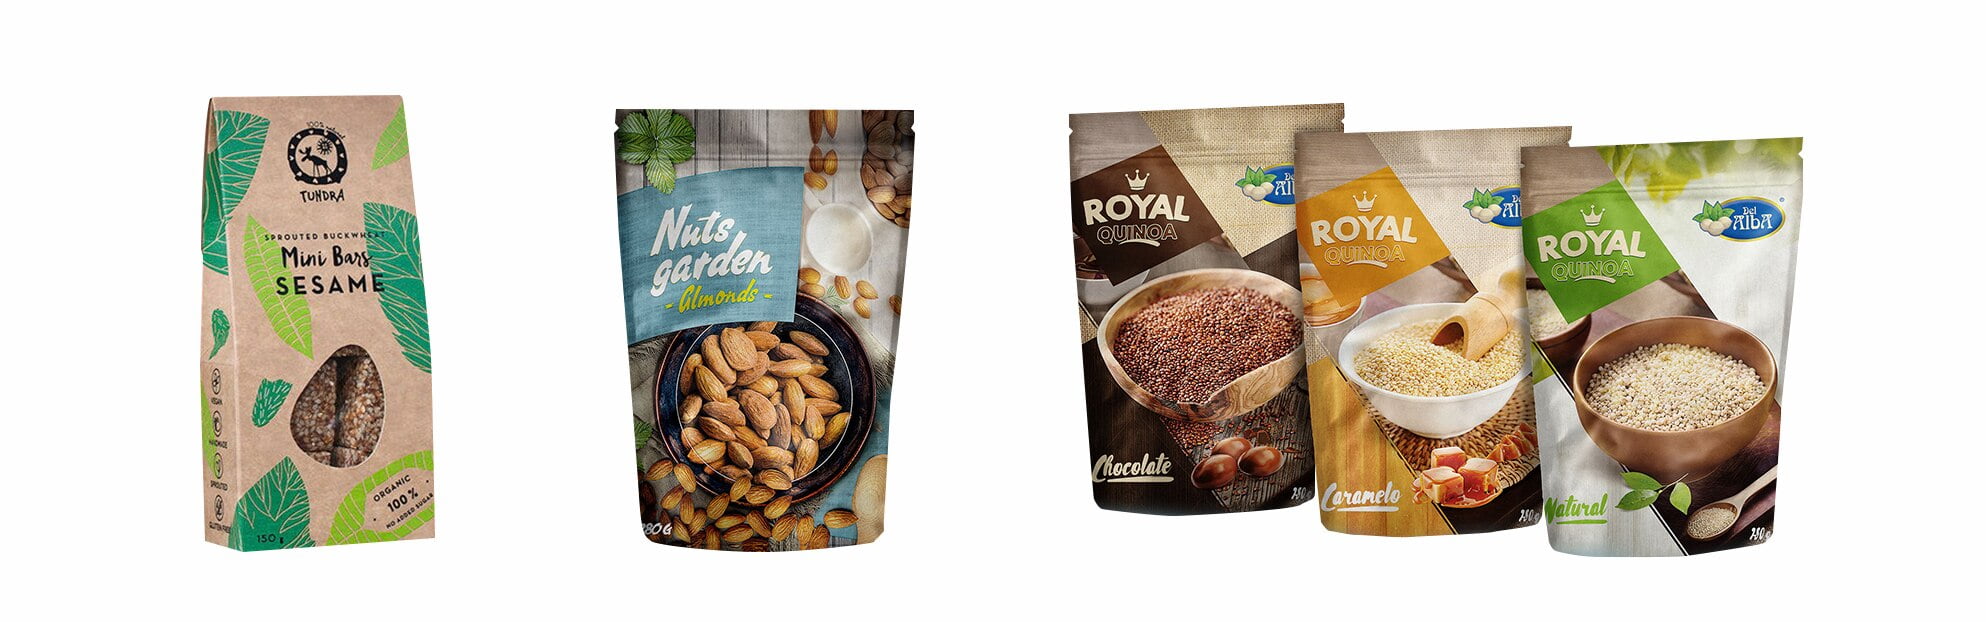 stand-up-bags-and-box-packaging-for-almonds-and-quinoa-foods.jpg